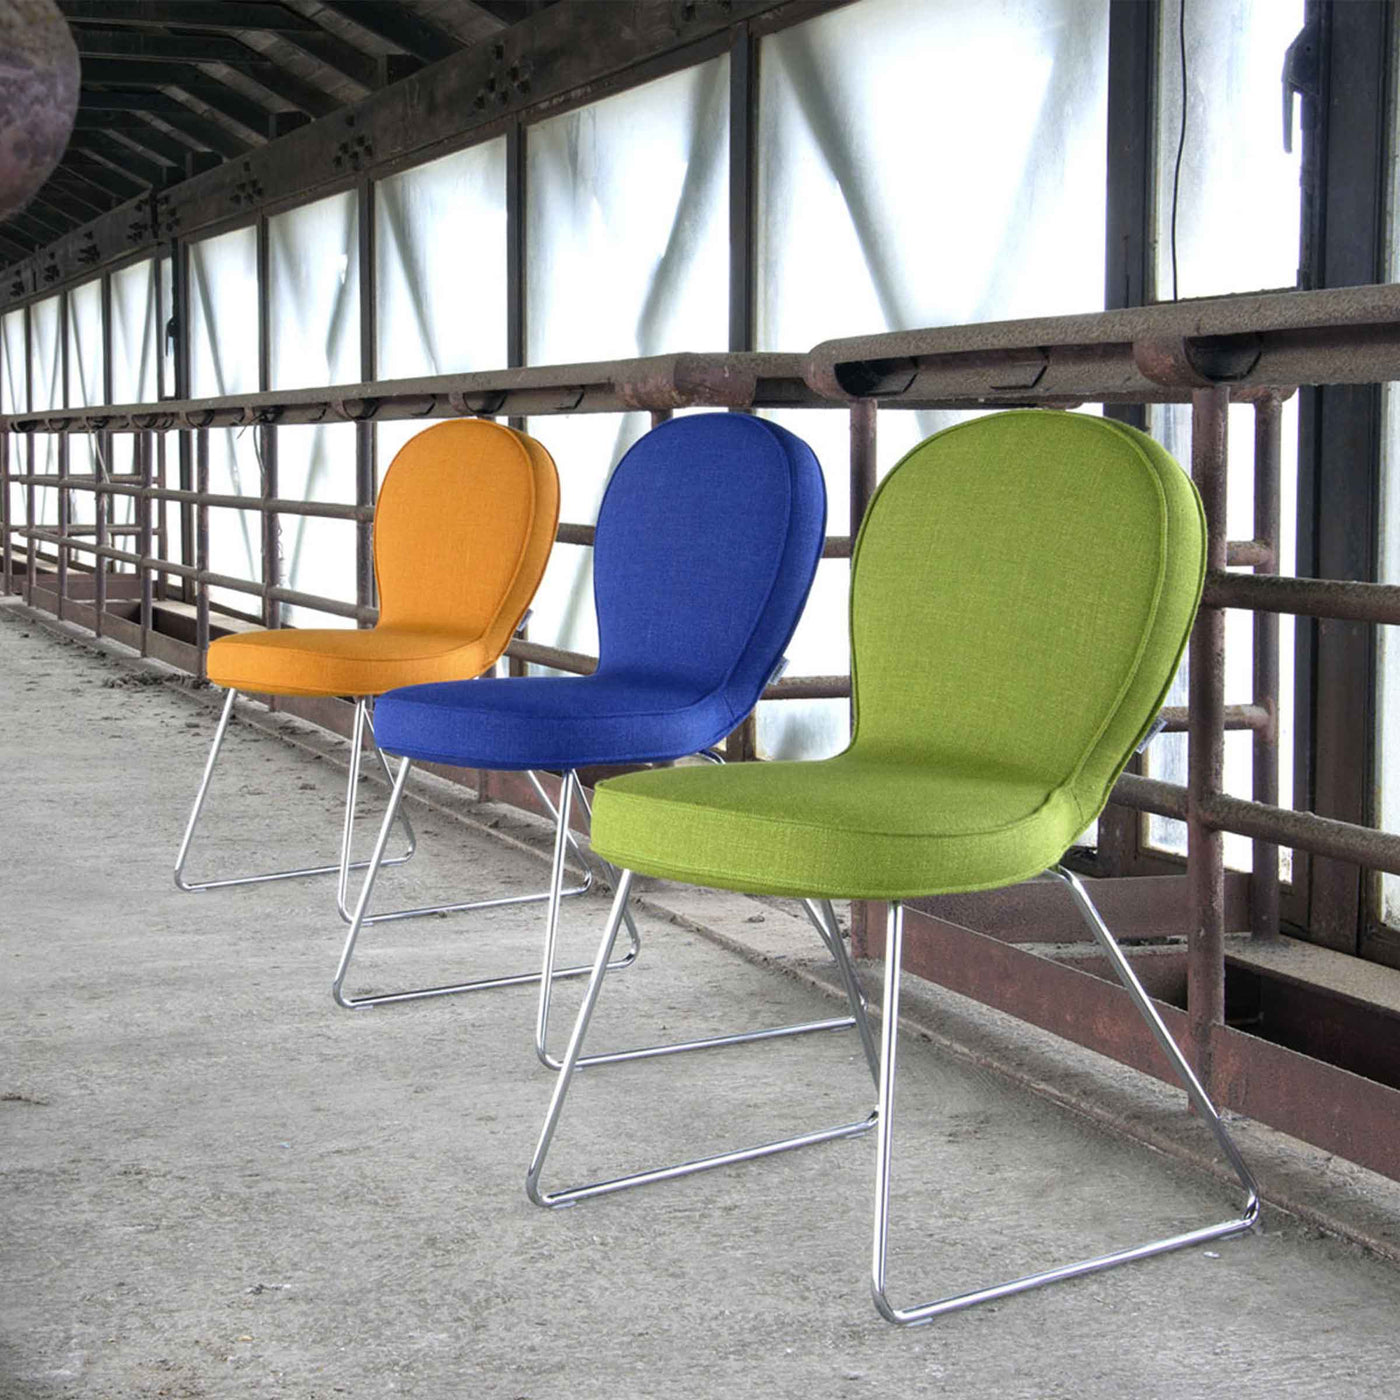 Chair B4 by Simone Micheli for Adrenalina 05